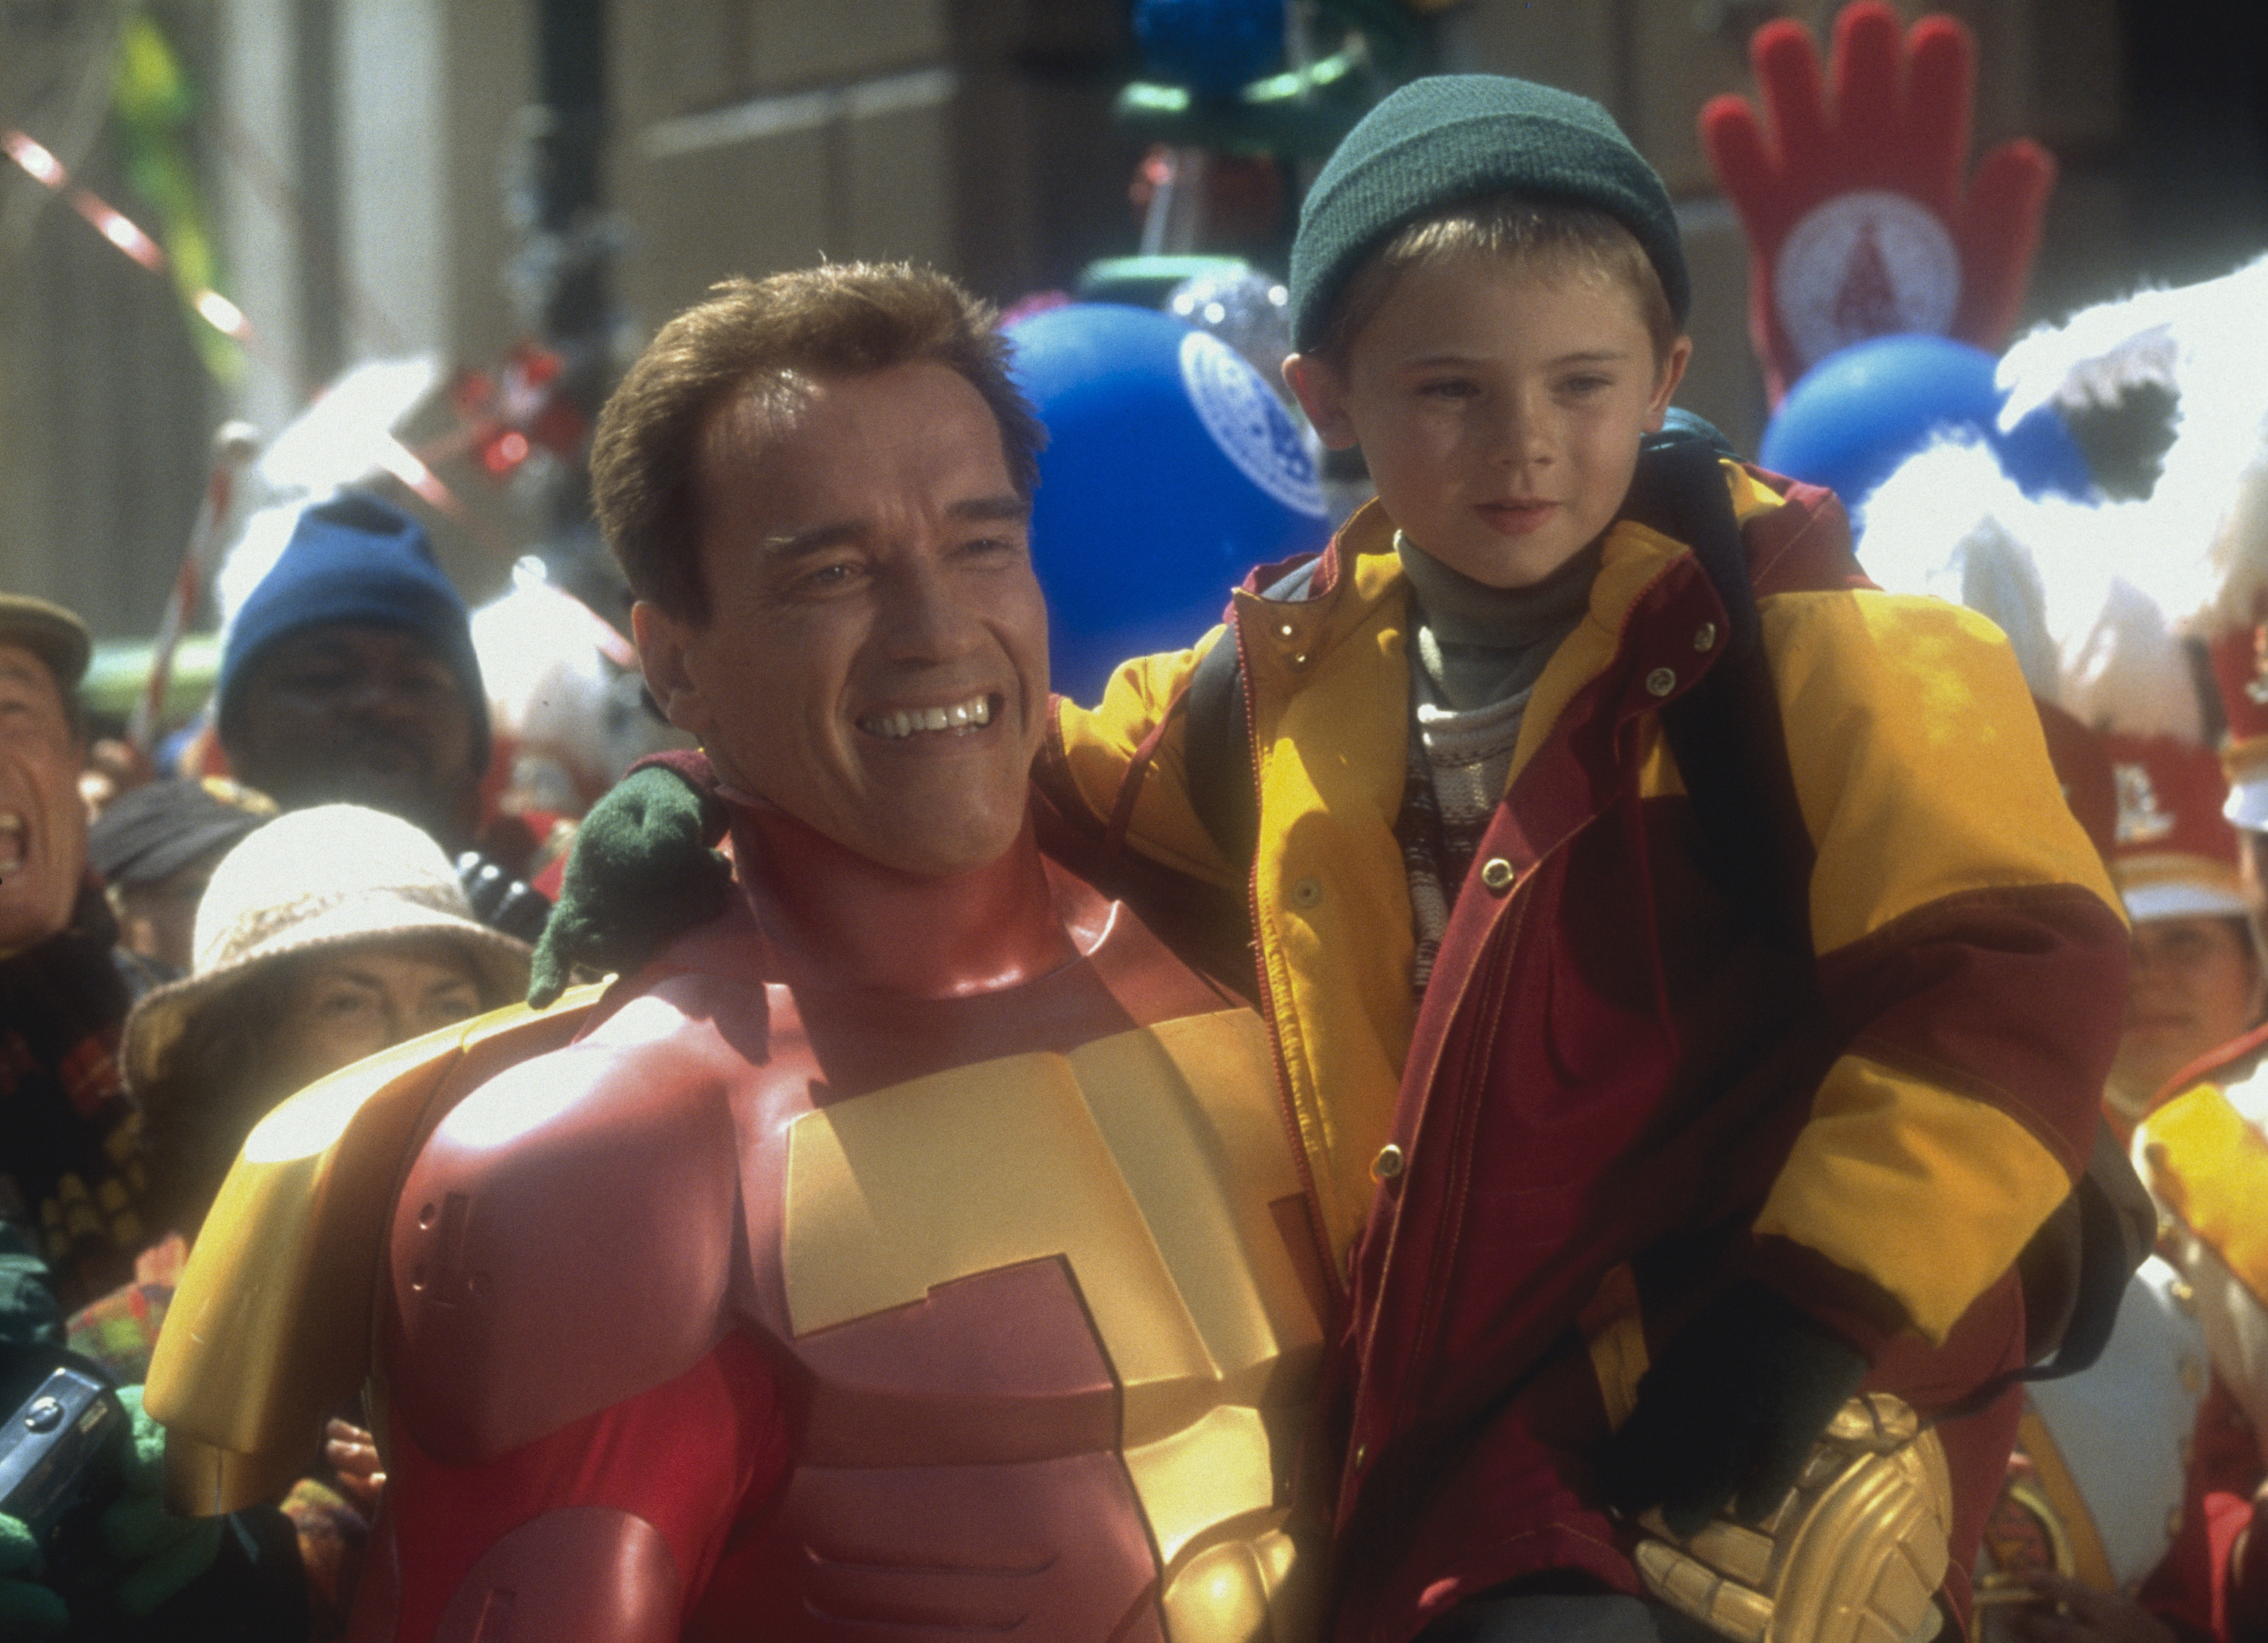 Jake Lloyd with Arnold Schwarzenegger on the set of "Jingle All the Way" in 1996 | Source: Getty images